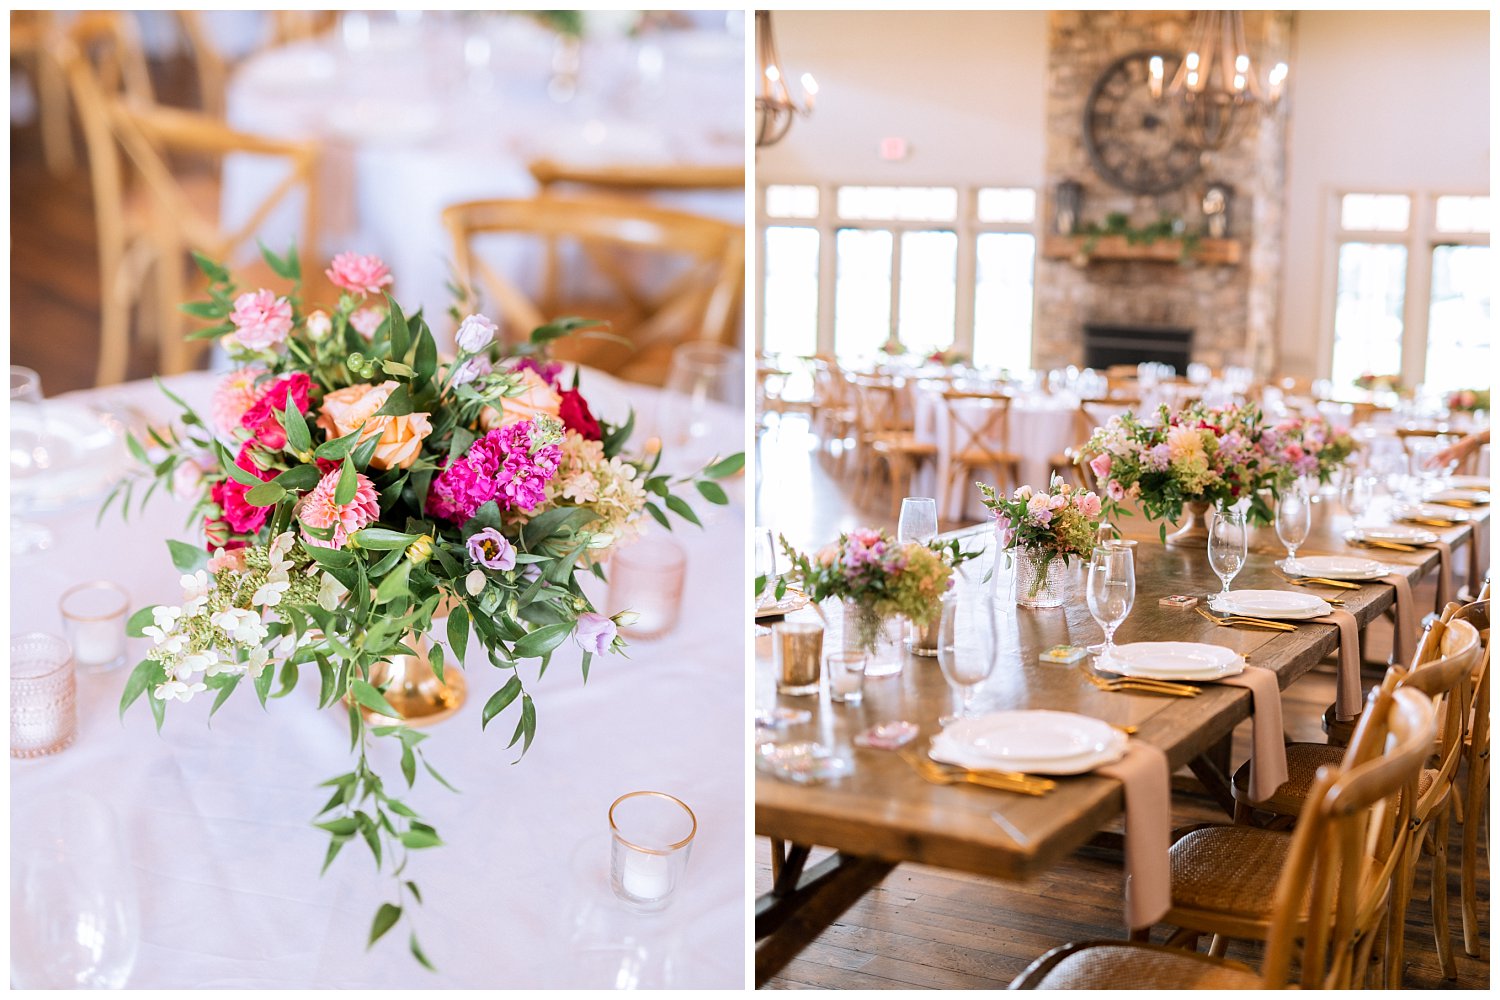 Reception decor for a vibrant pink fall wedding at King Family Vineyard